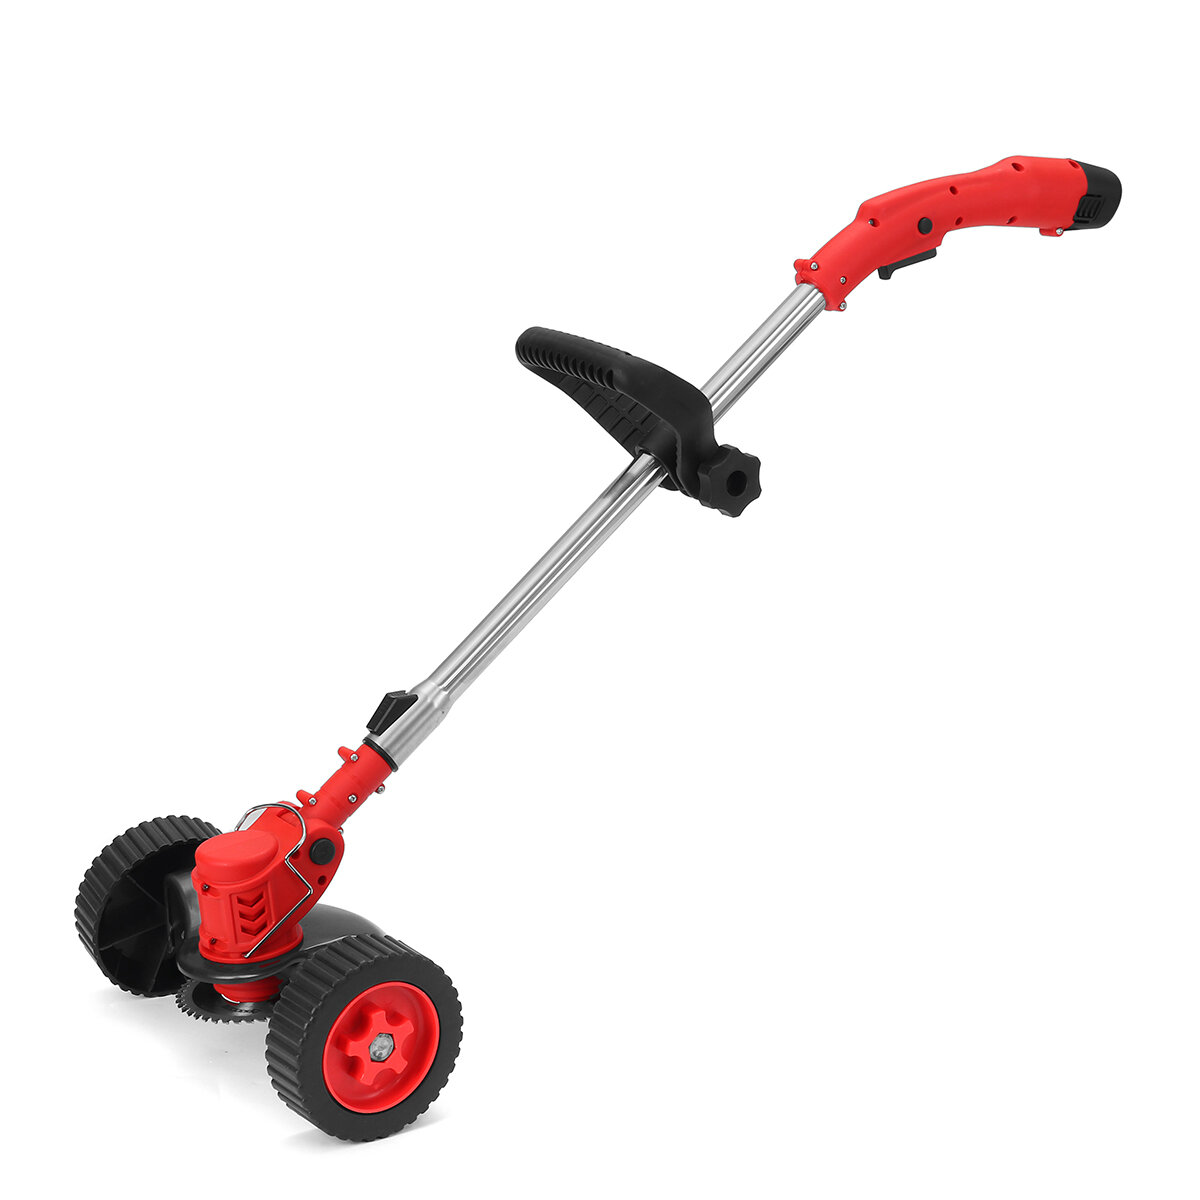 

24V 1300W Electric Cordless String Trimmer Lawn Mower W/ Wheels Weed Eater Garden Grass Cutting Tool W/ 1/2pcs Battery